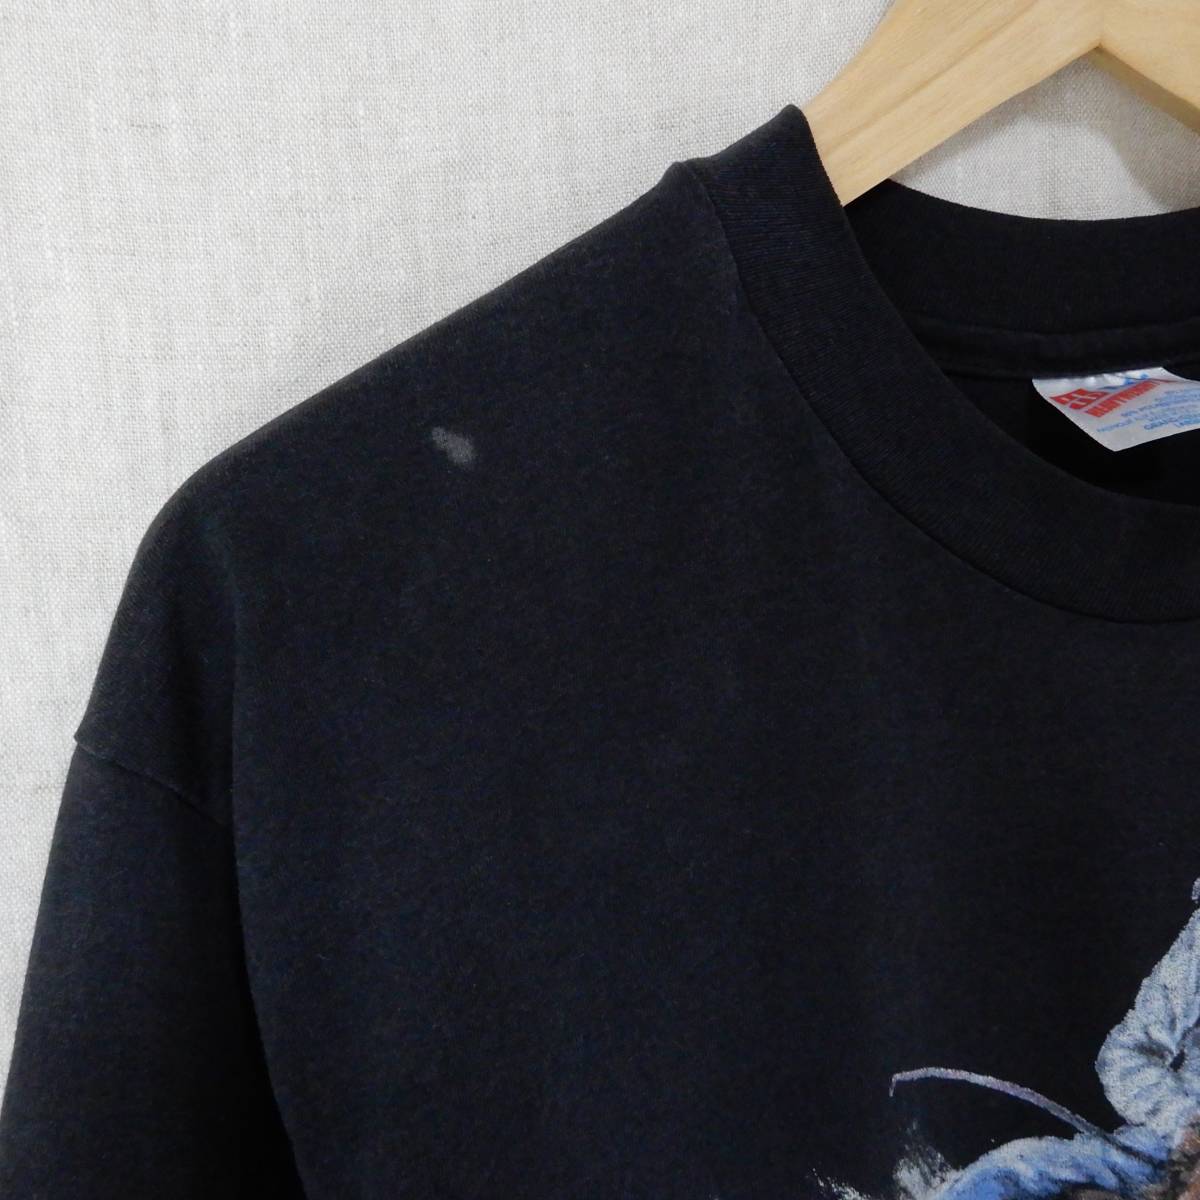 Hanes HEAVYWEIGHT T-Shirts 1990s LARGE T153 Made in USA ヘインズ ヘビーウェイト 1990年代 アメリカ製_画像7